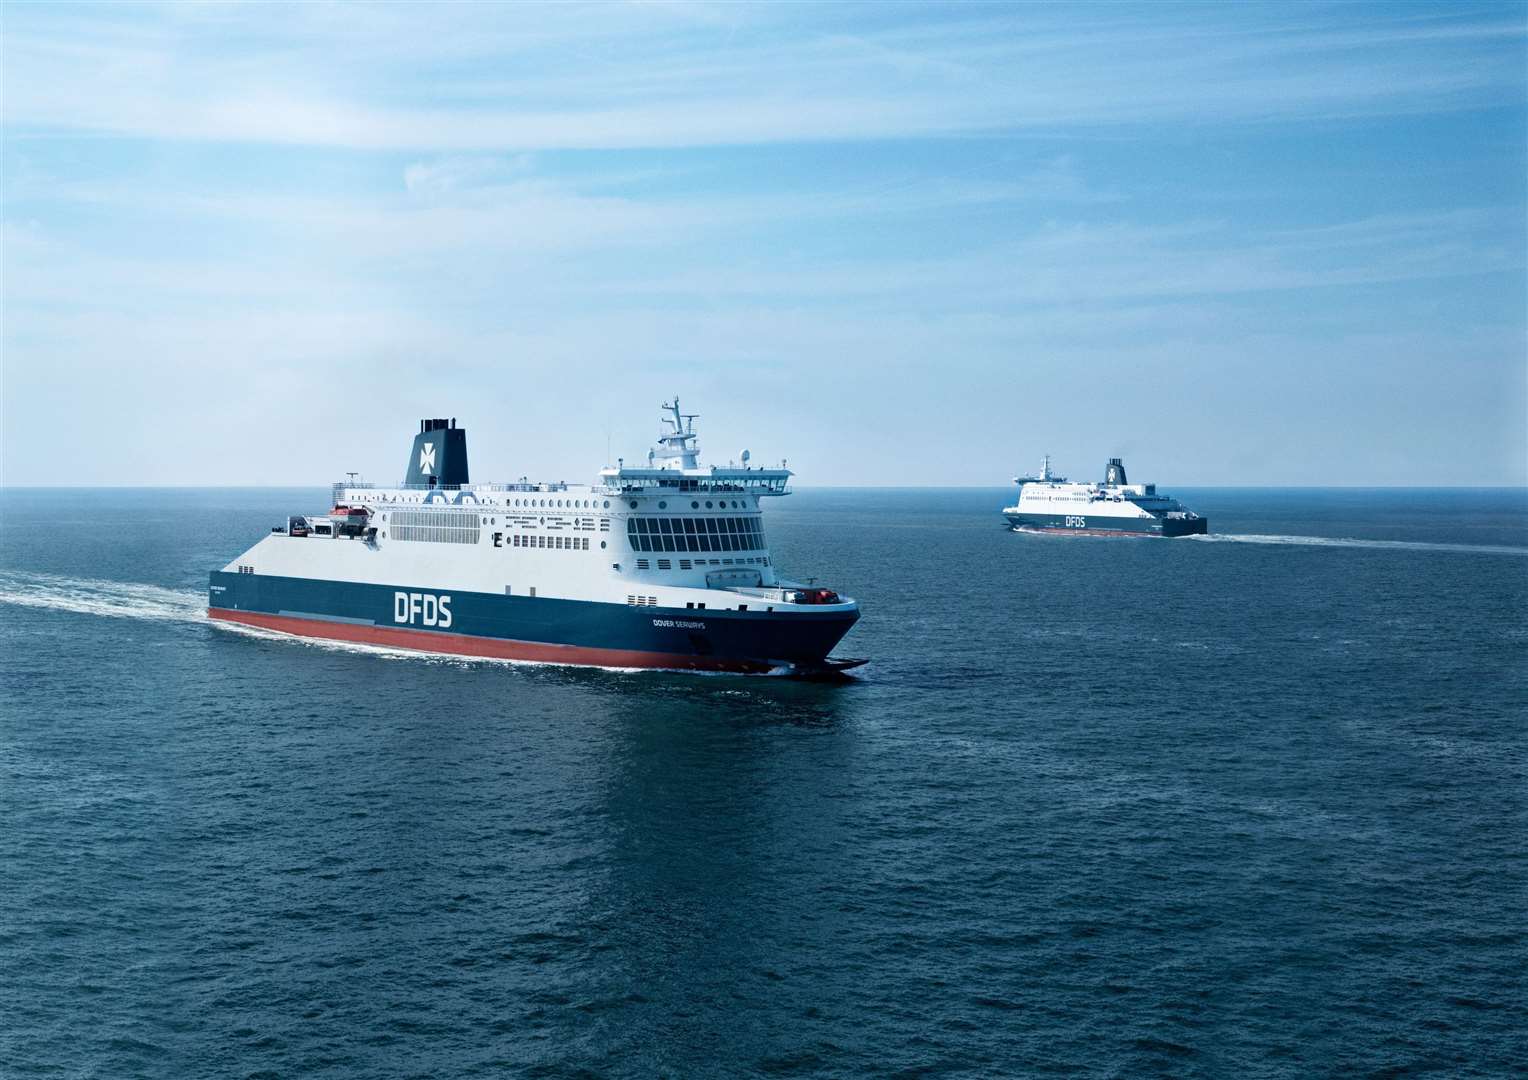 DFDS is committed to equal opportunities